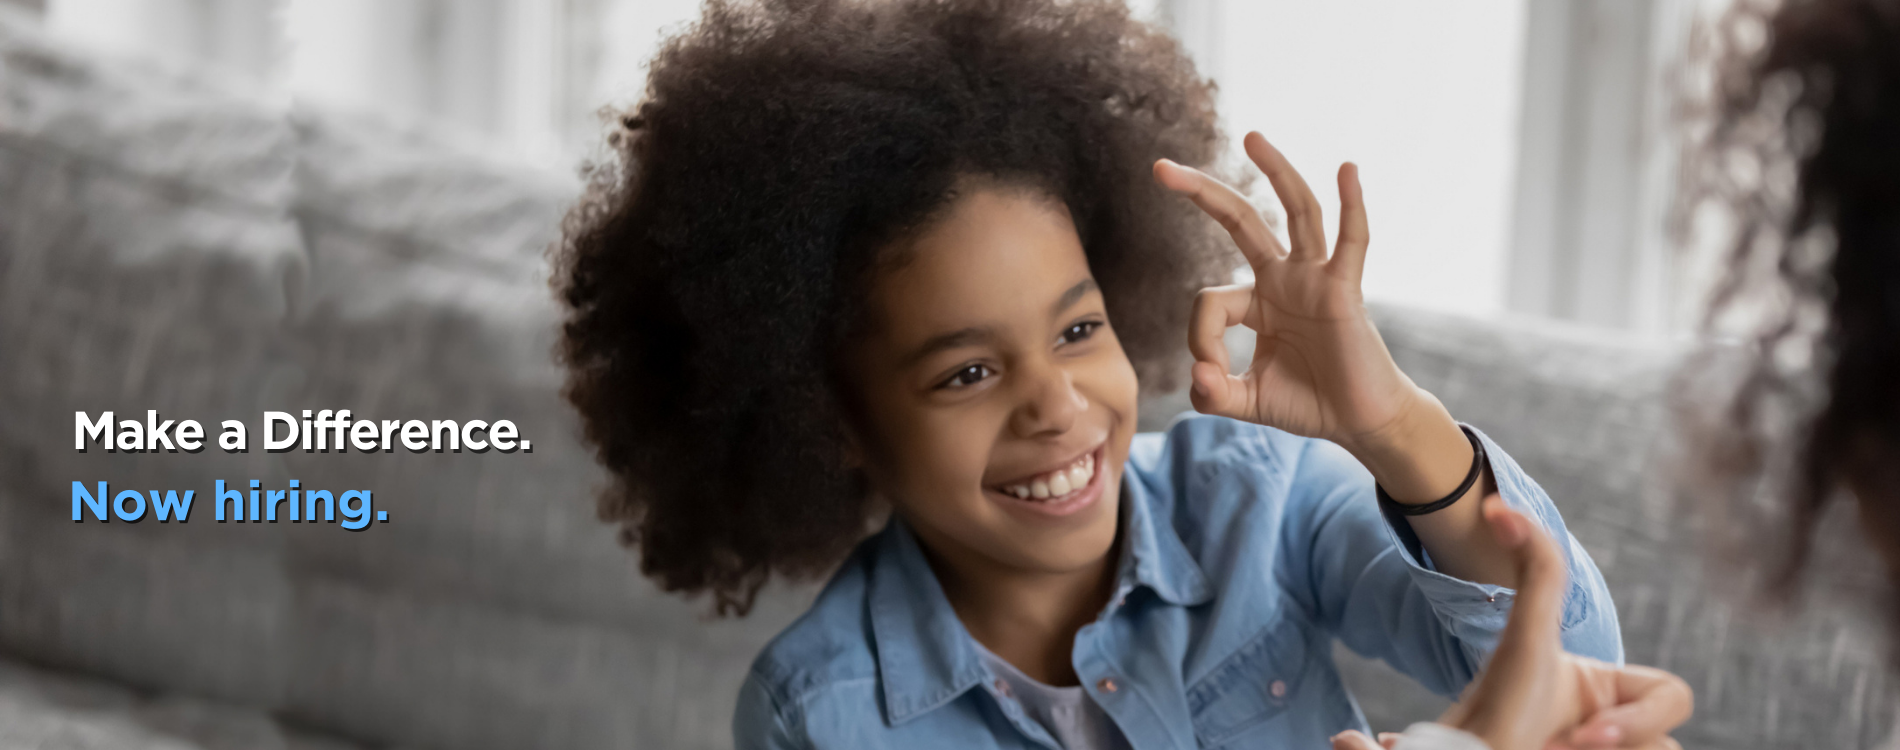 Young Black child giving the ok sign with text that says Make a Difference Now Hiring